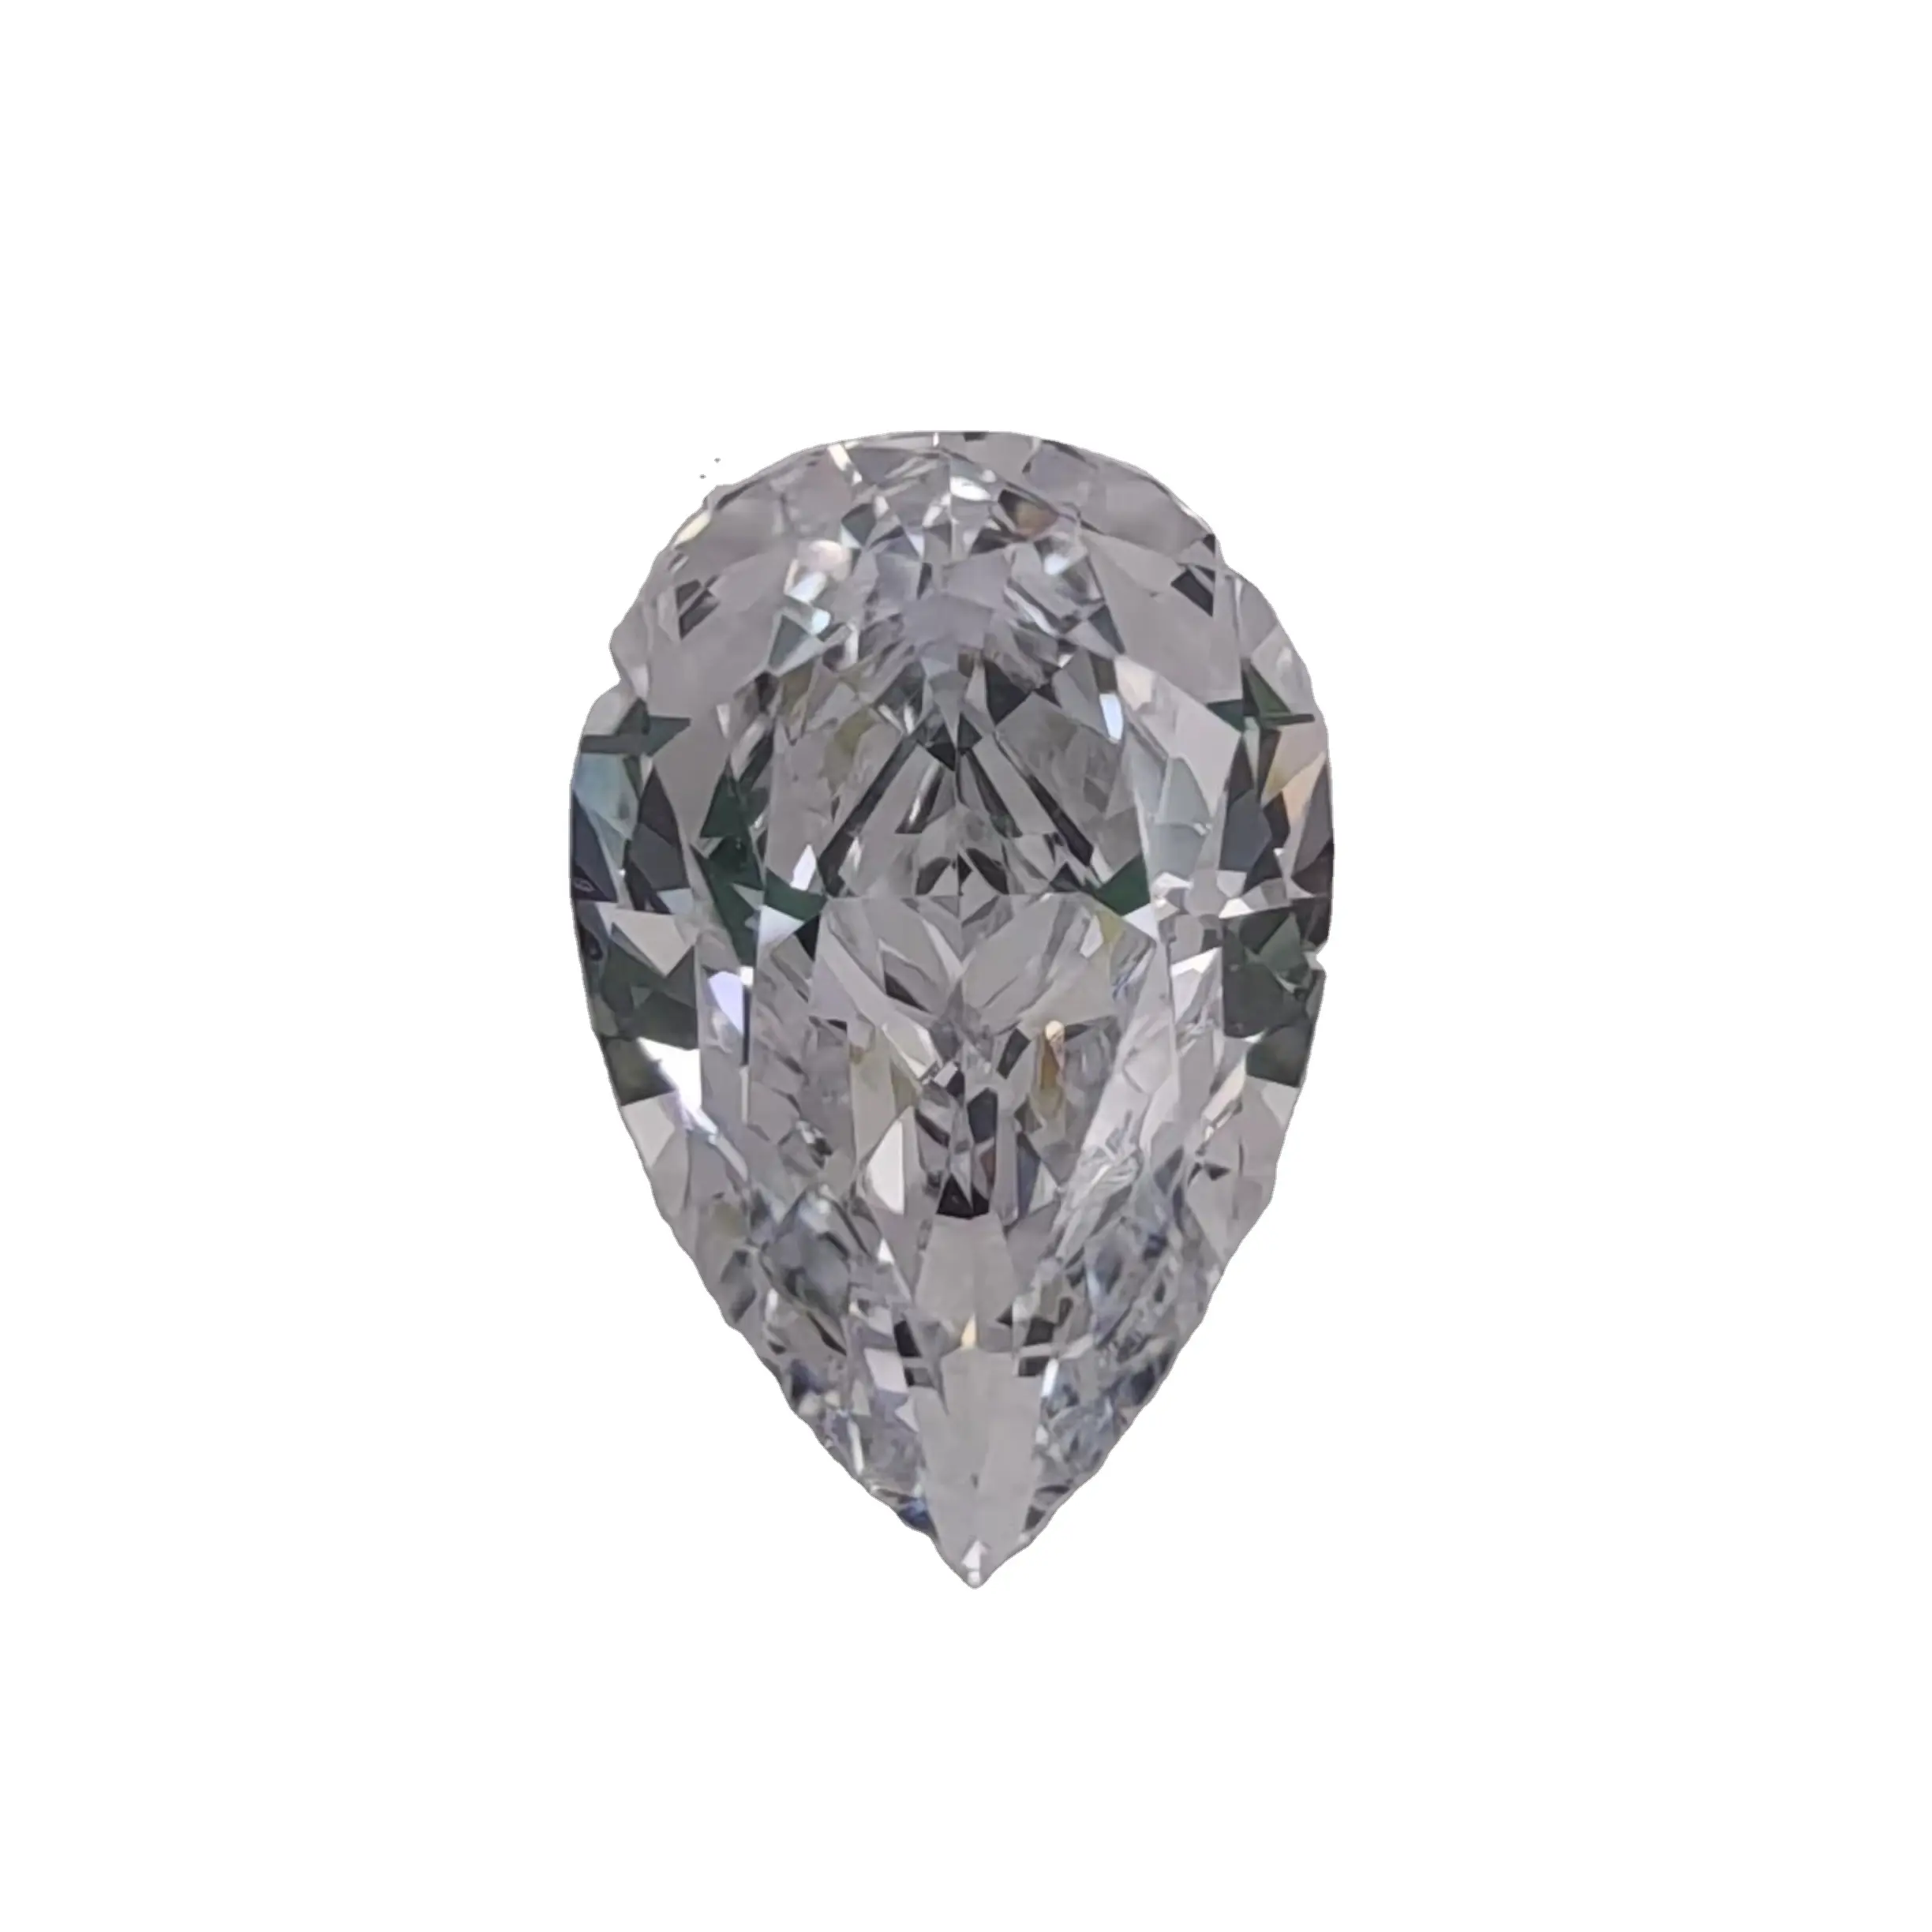 Lab created white loose gem moissanite pear shape for jewelry making gemstone D color VVS1 clarity